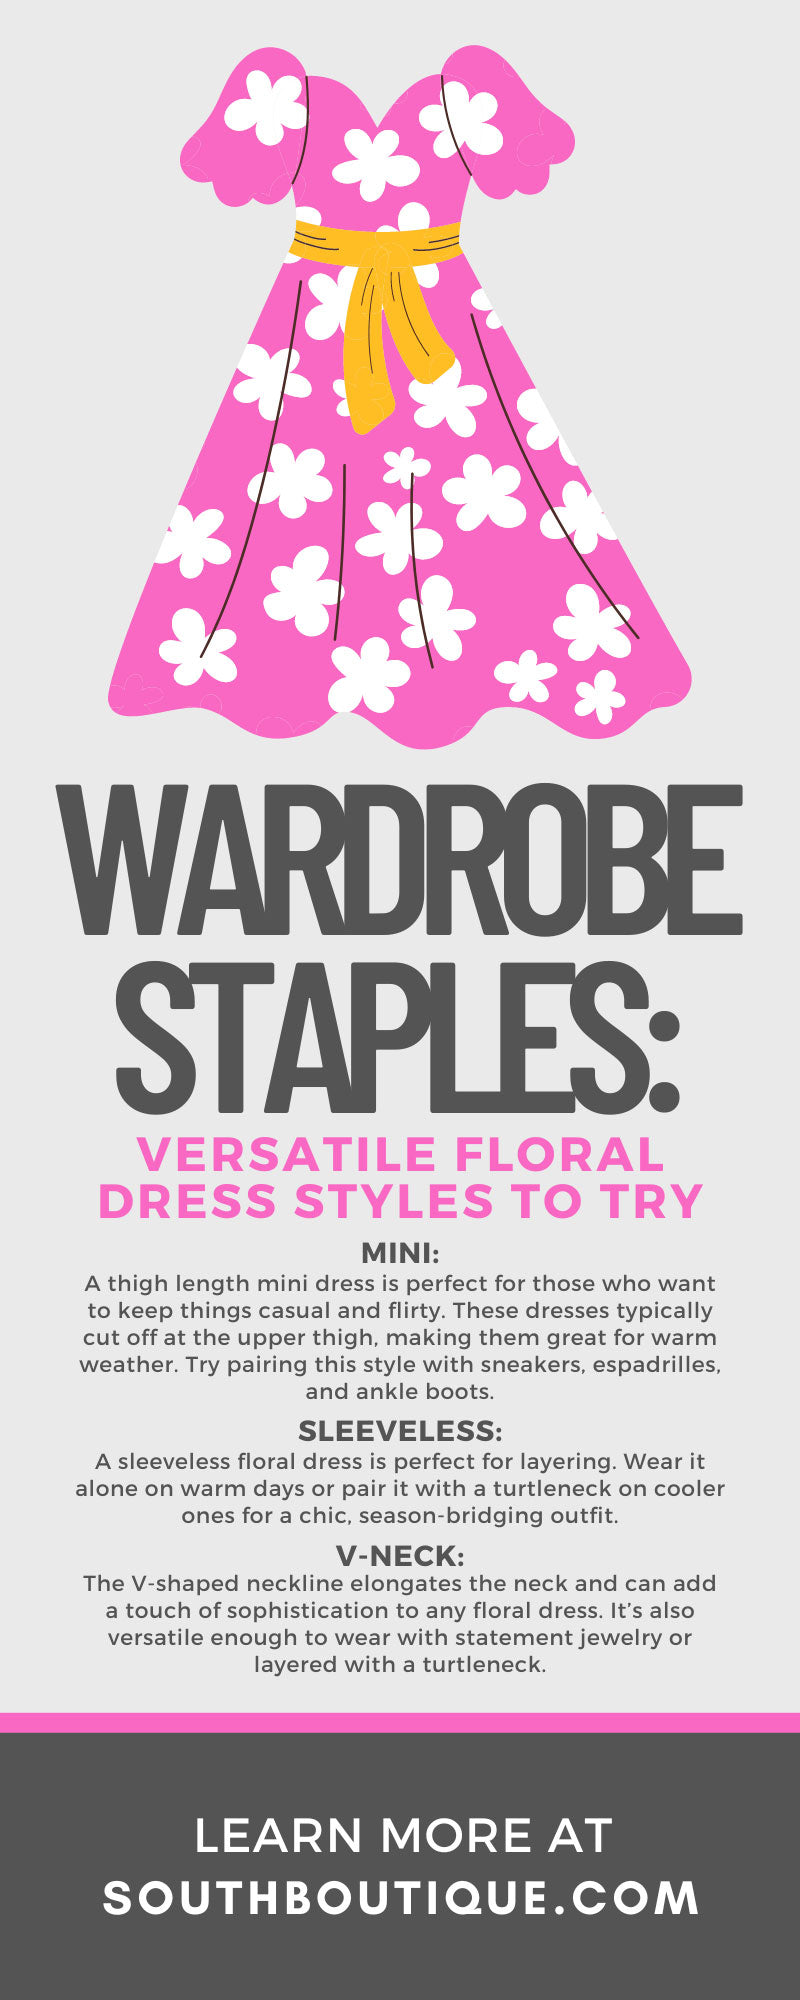 Wardrobe Staples: 9 Versatile Floral Dress Styles To Try